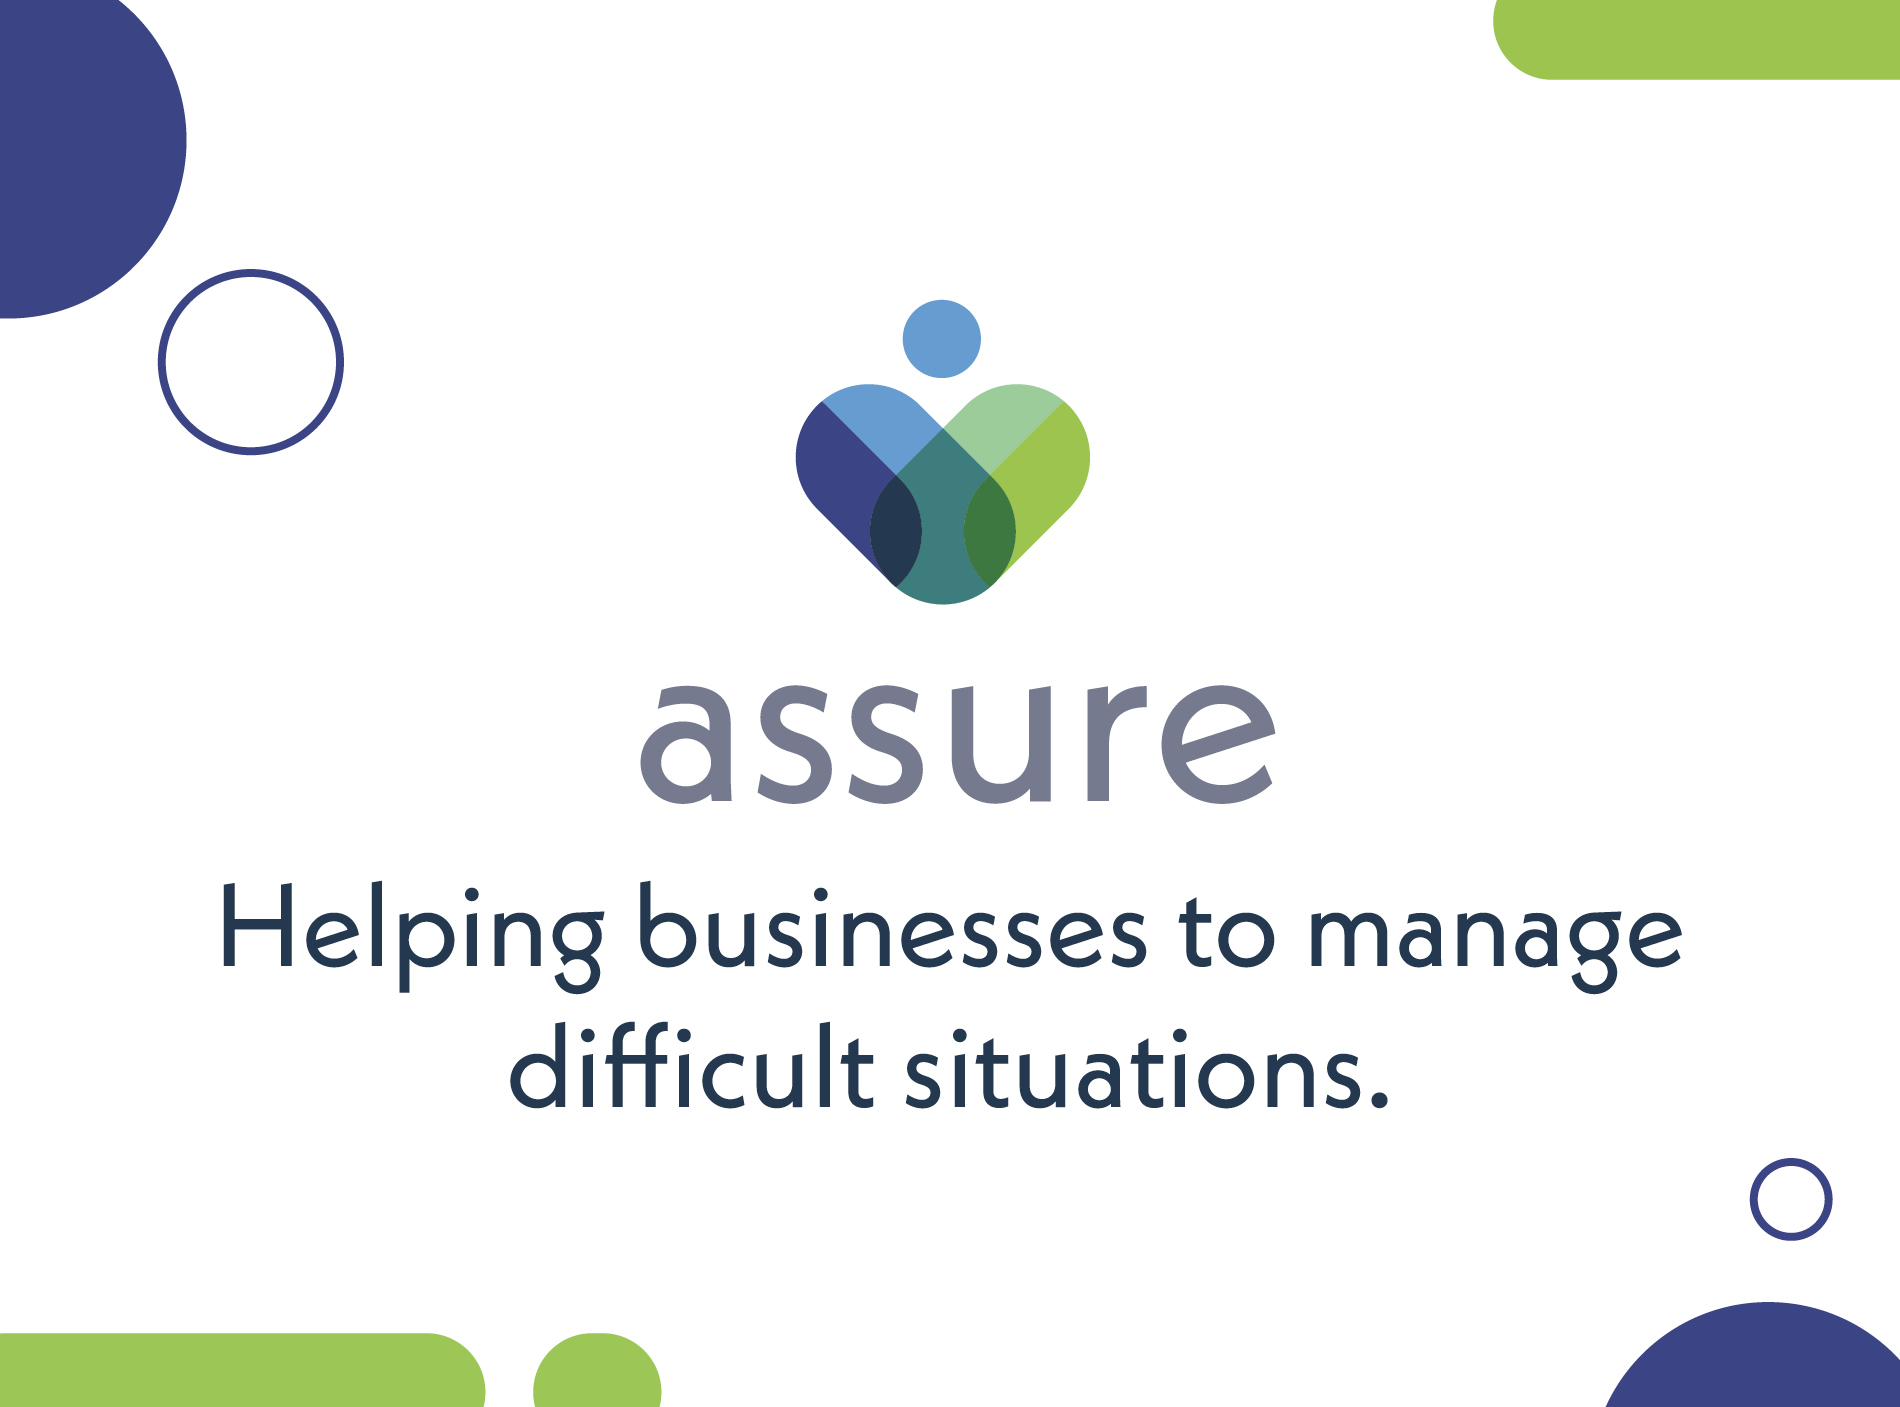 Assure - helping businesses to manage difficult situations.